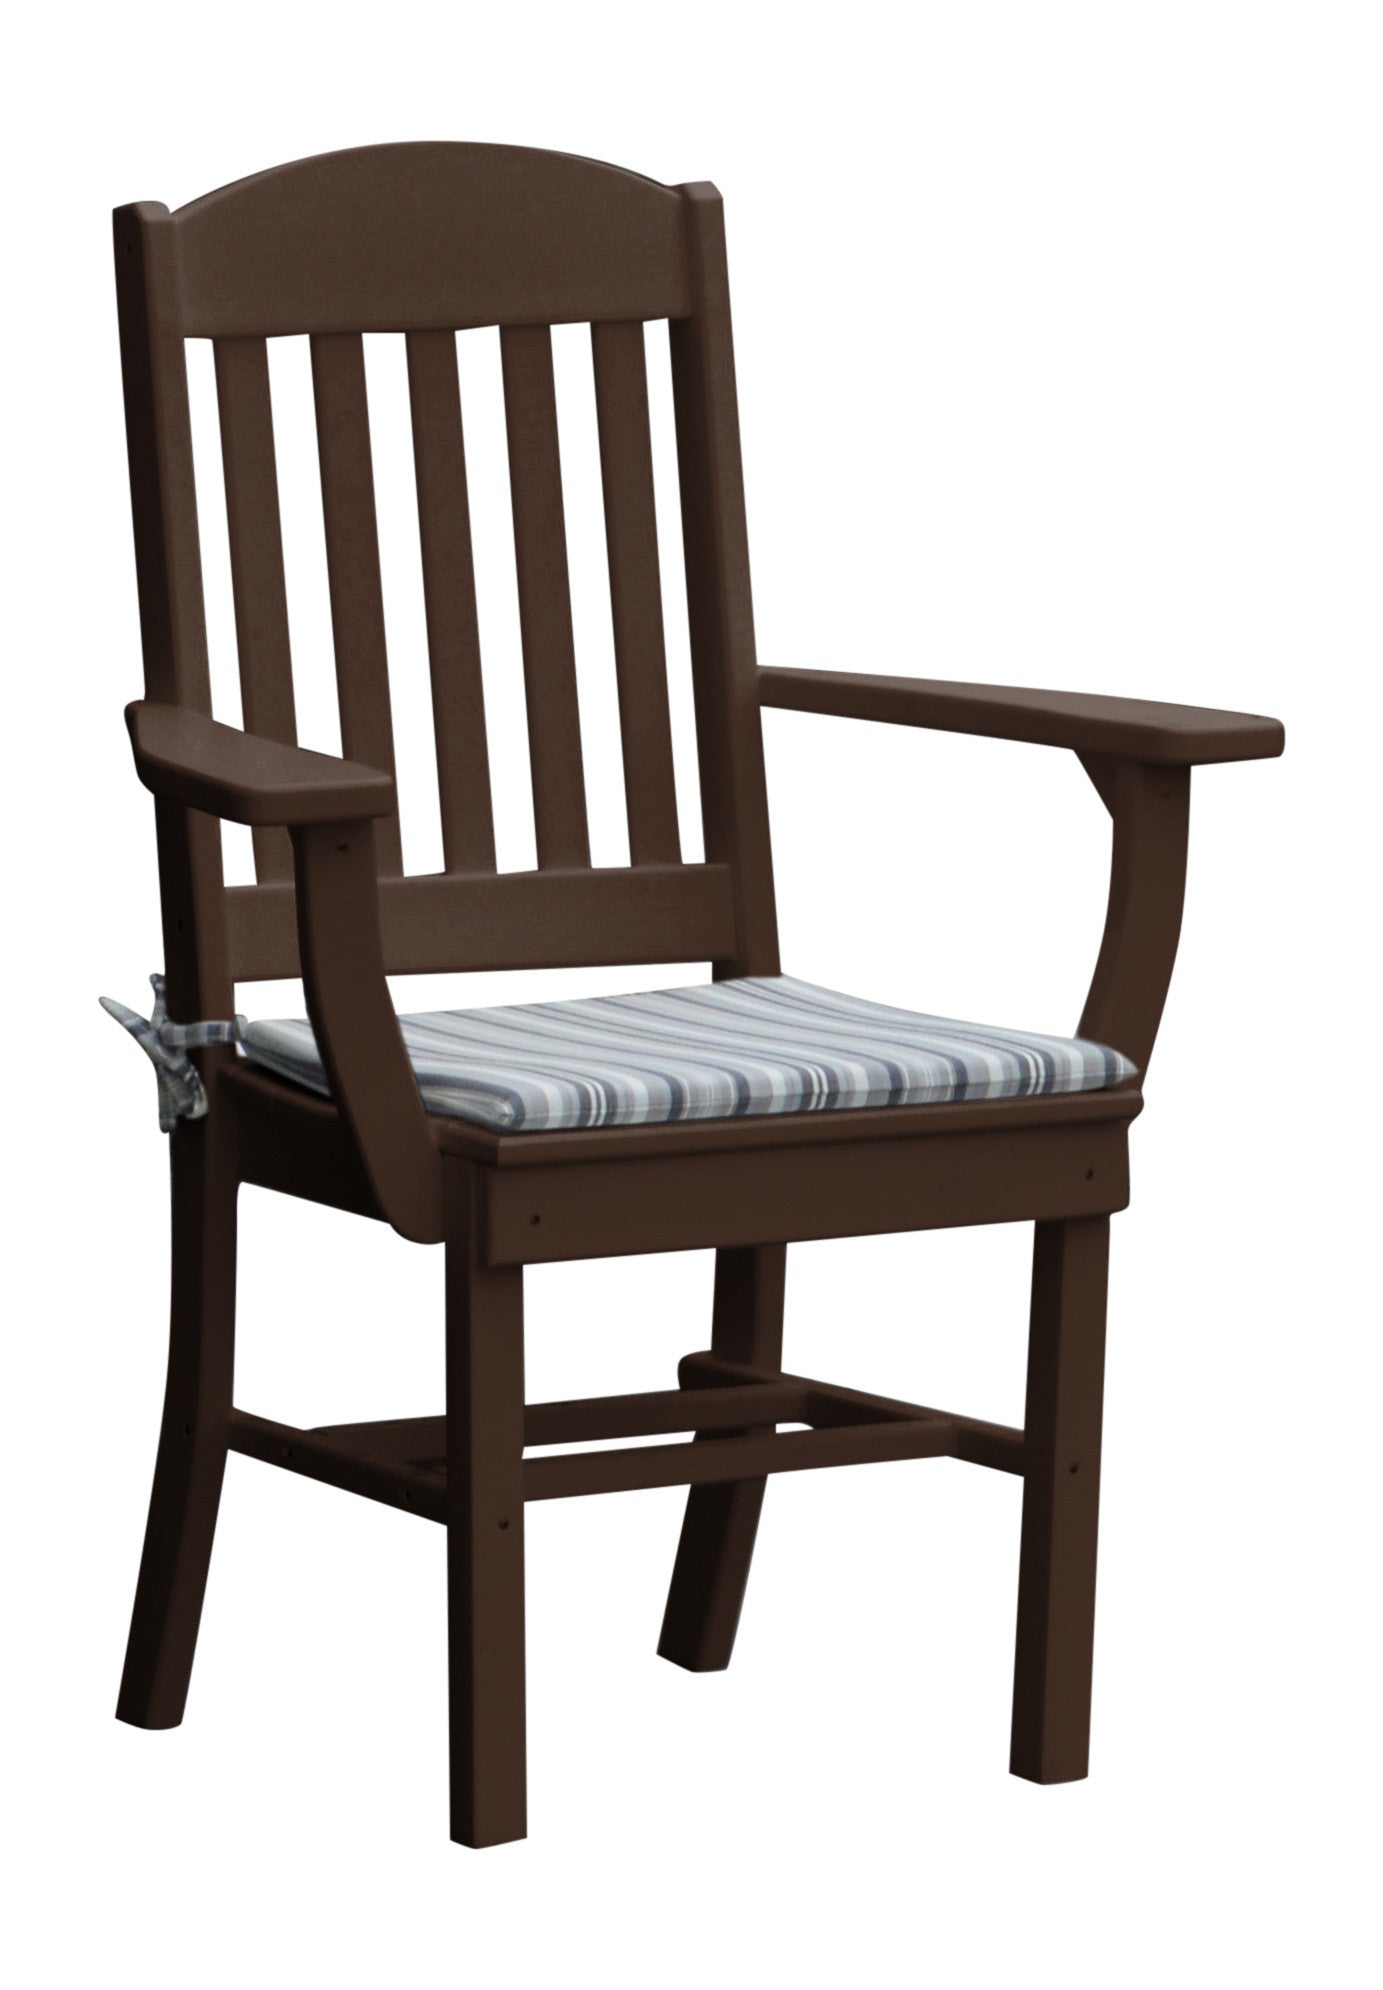 A&L Furniture Company Recycled Plastic Classic Dining Chair w/ Arms - Tudor Brown